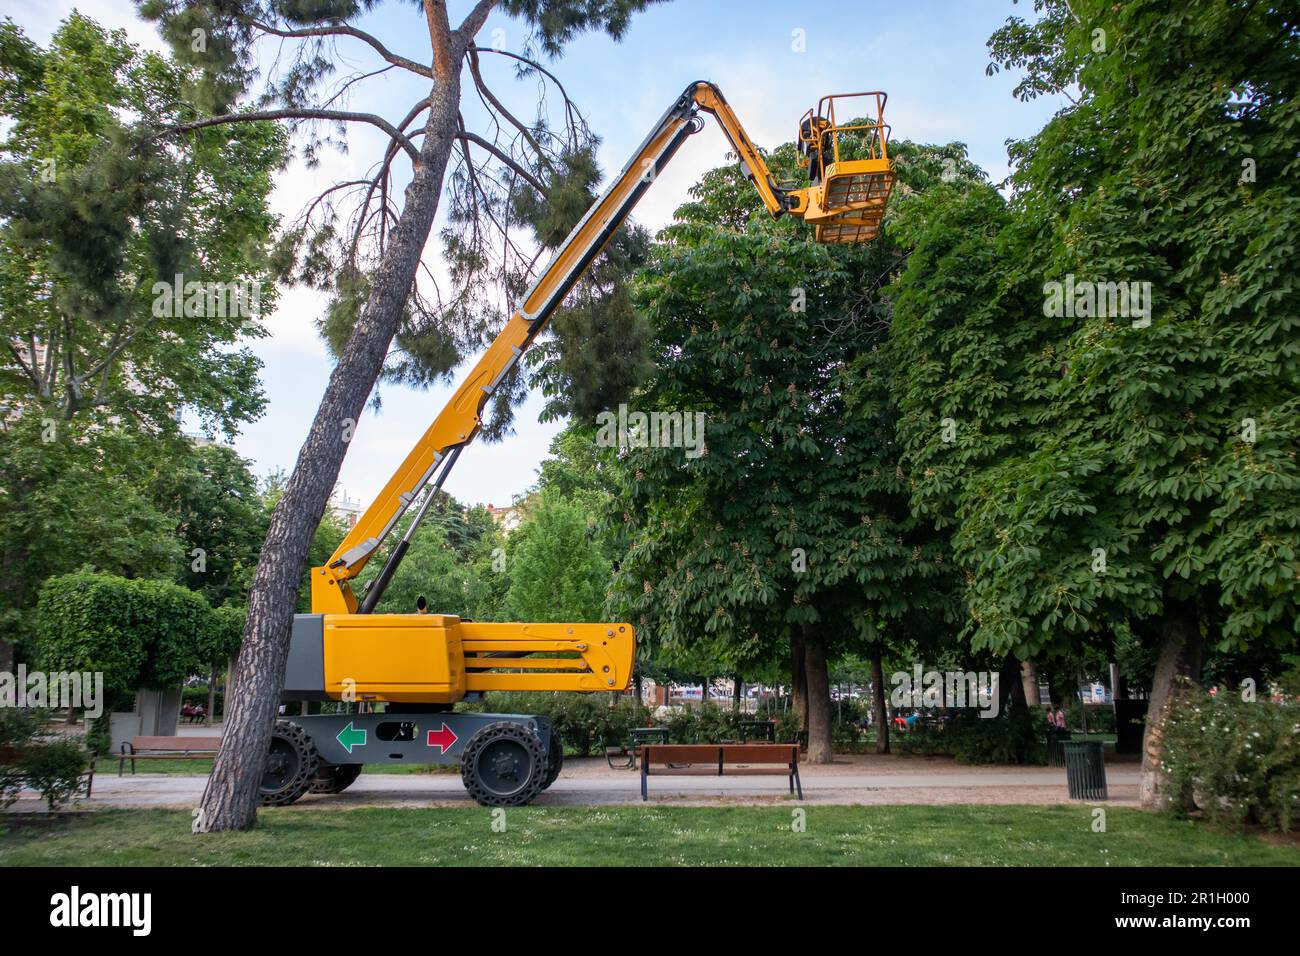 Crane machine for cutting branches. Spruce tree care on high in park. Arborist, surgeon, arboriculturist. Arboriculture, cultivation woody plants in d Stock Photo